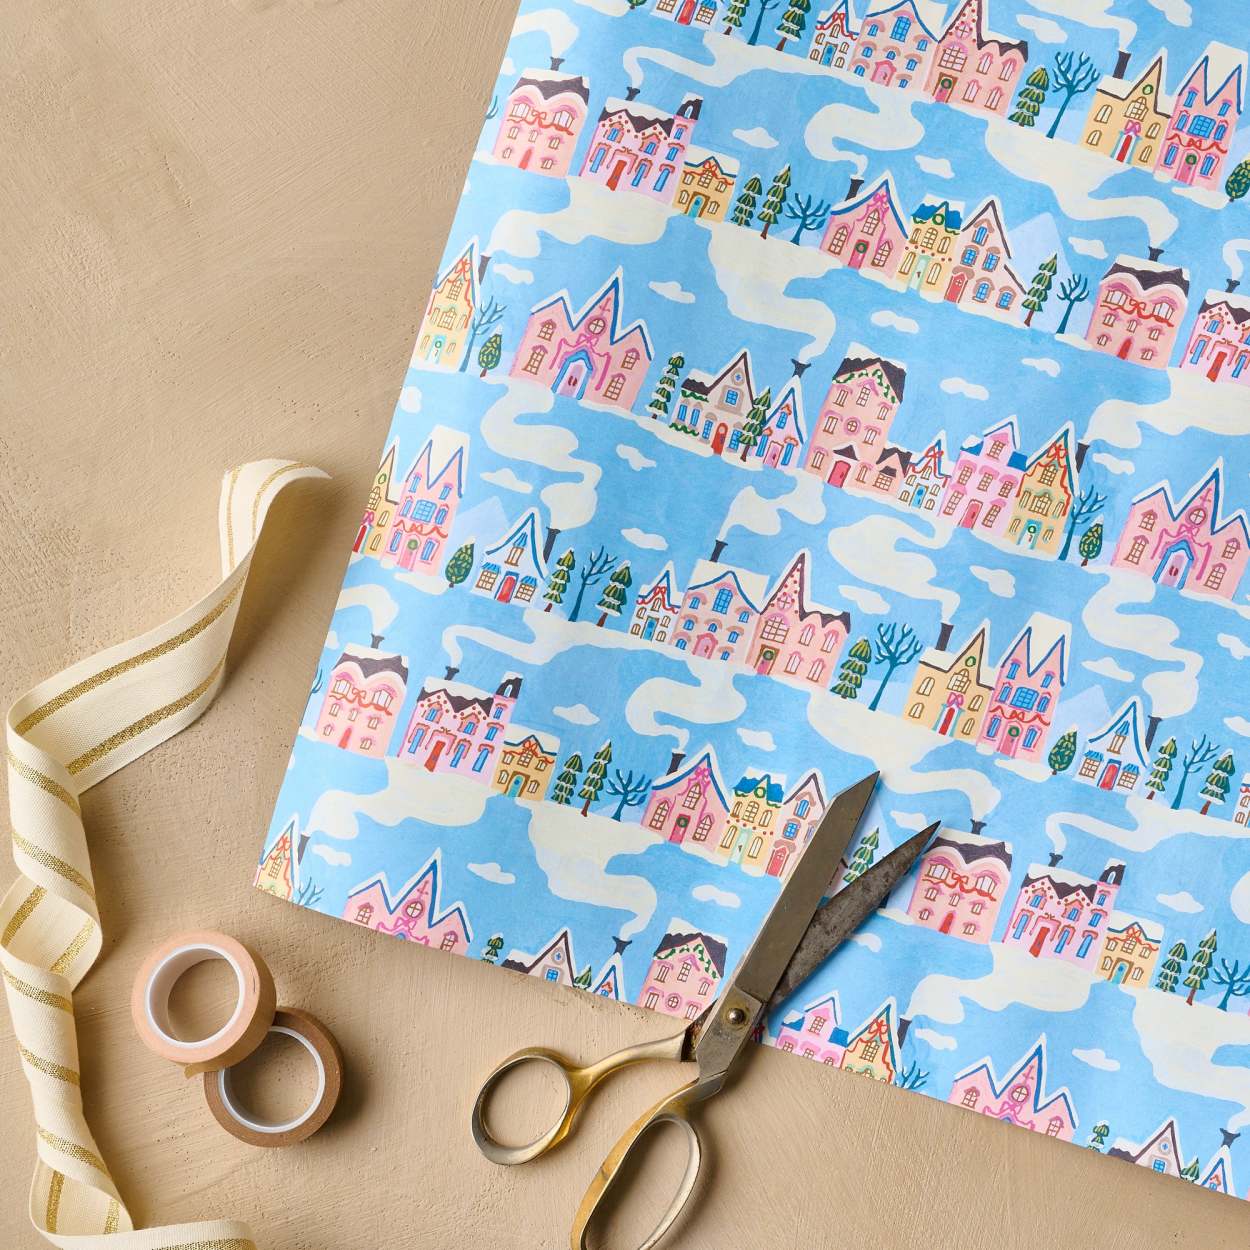 Adoption is Love - cute pink wrapping paper